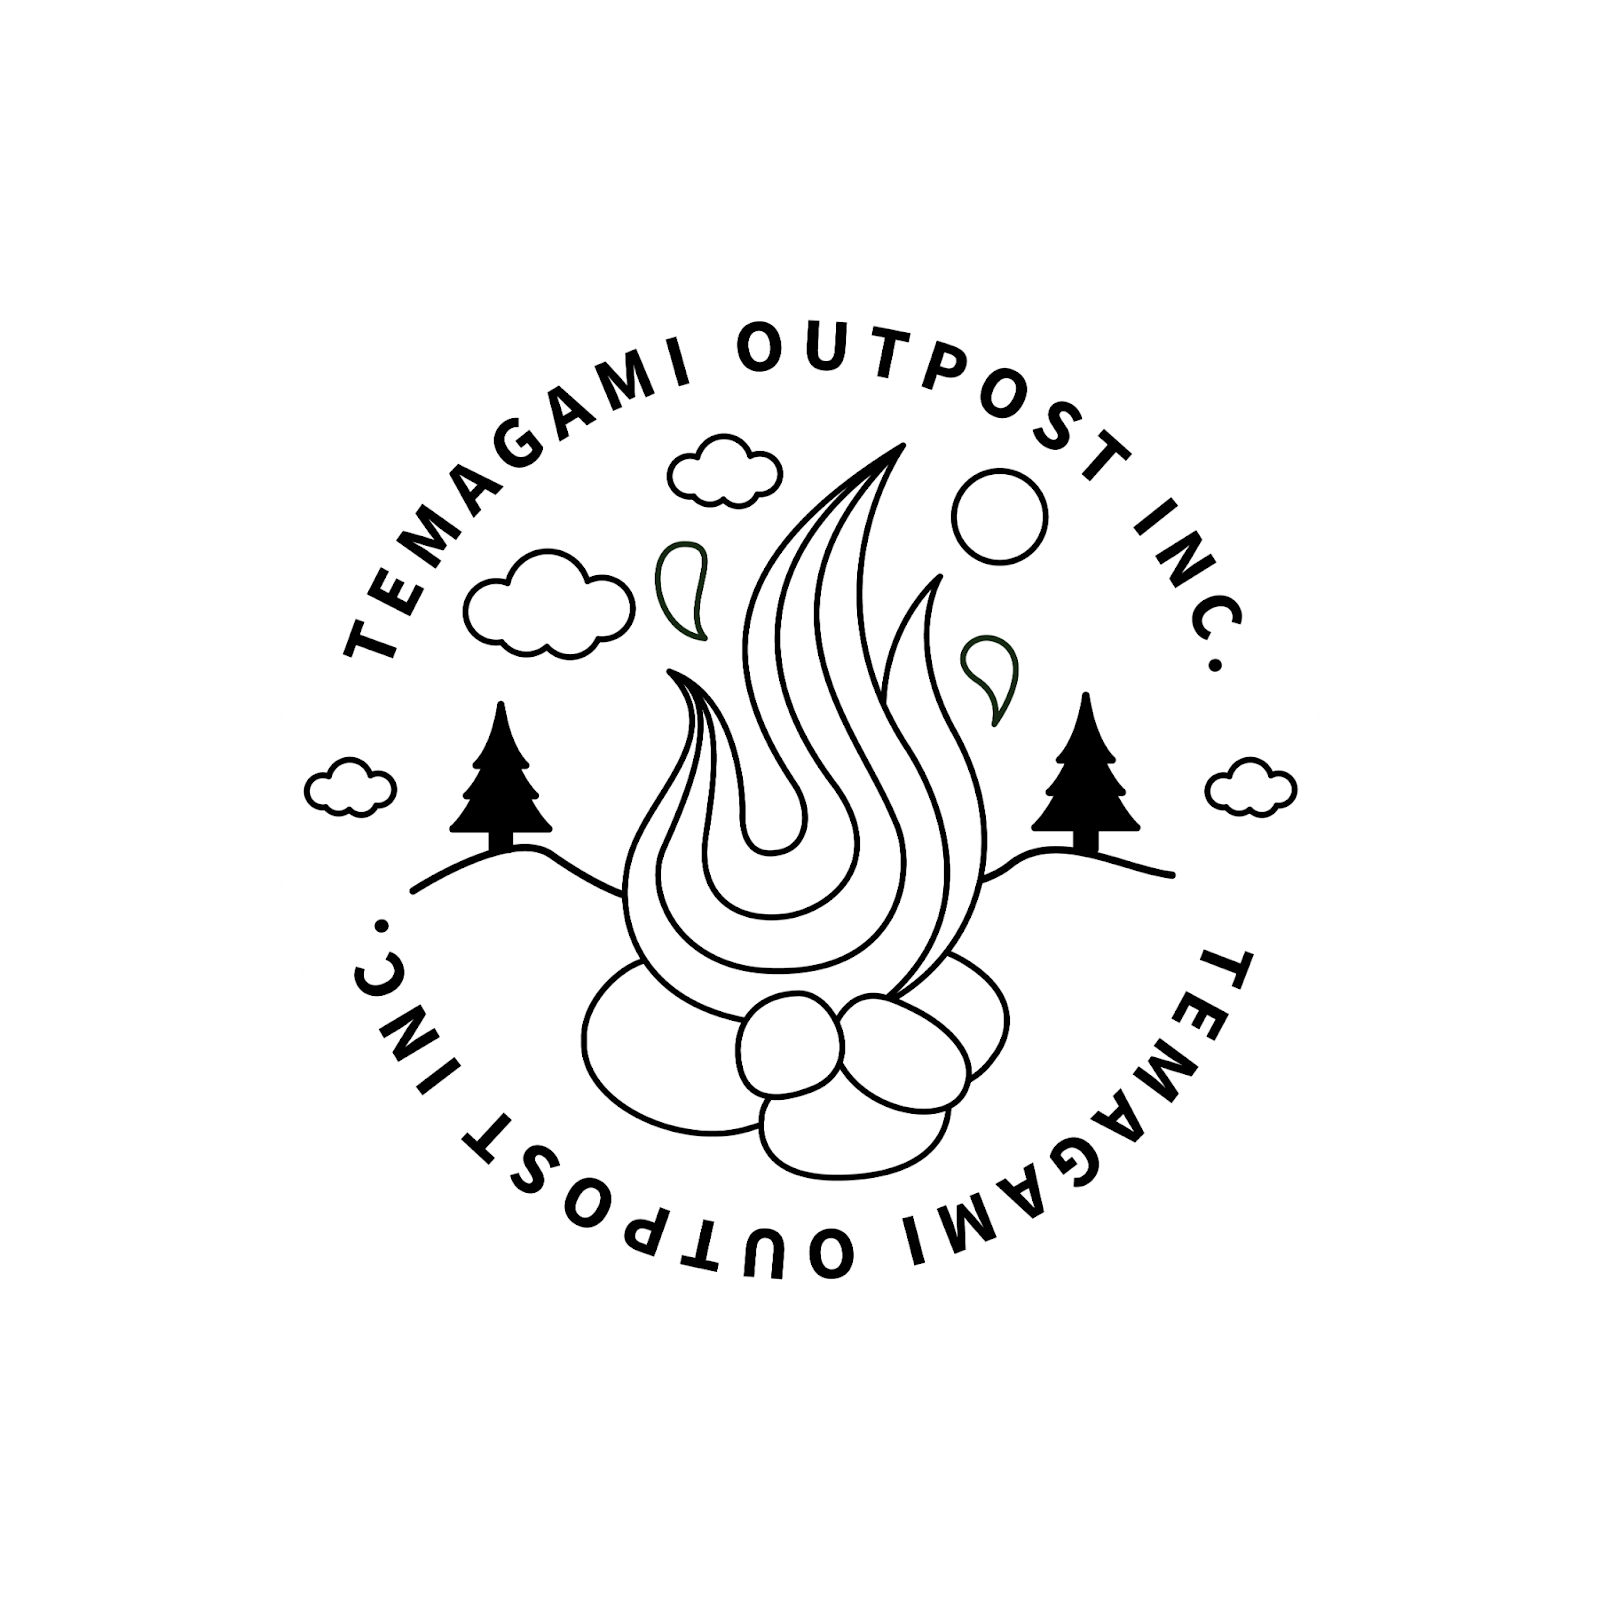 Temagami Outpost